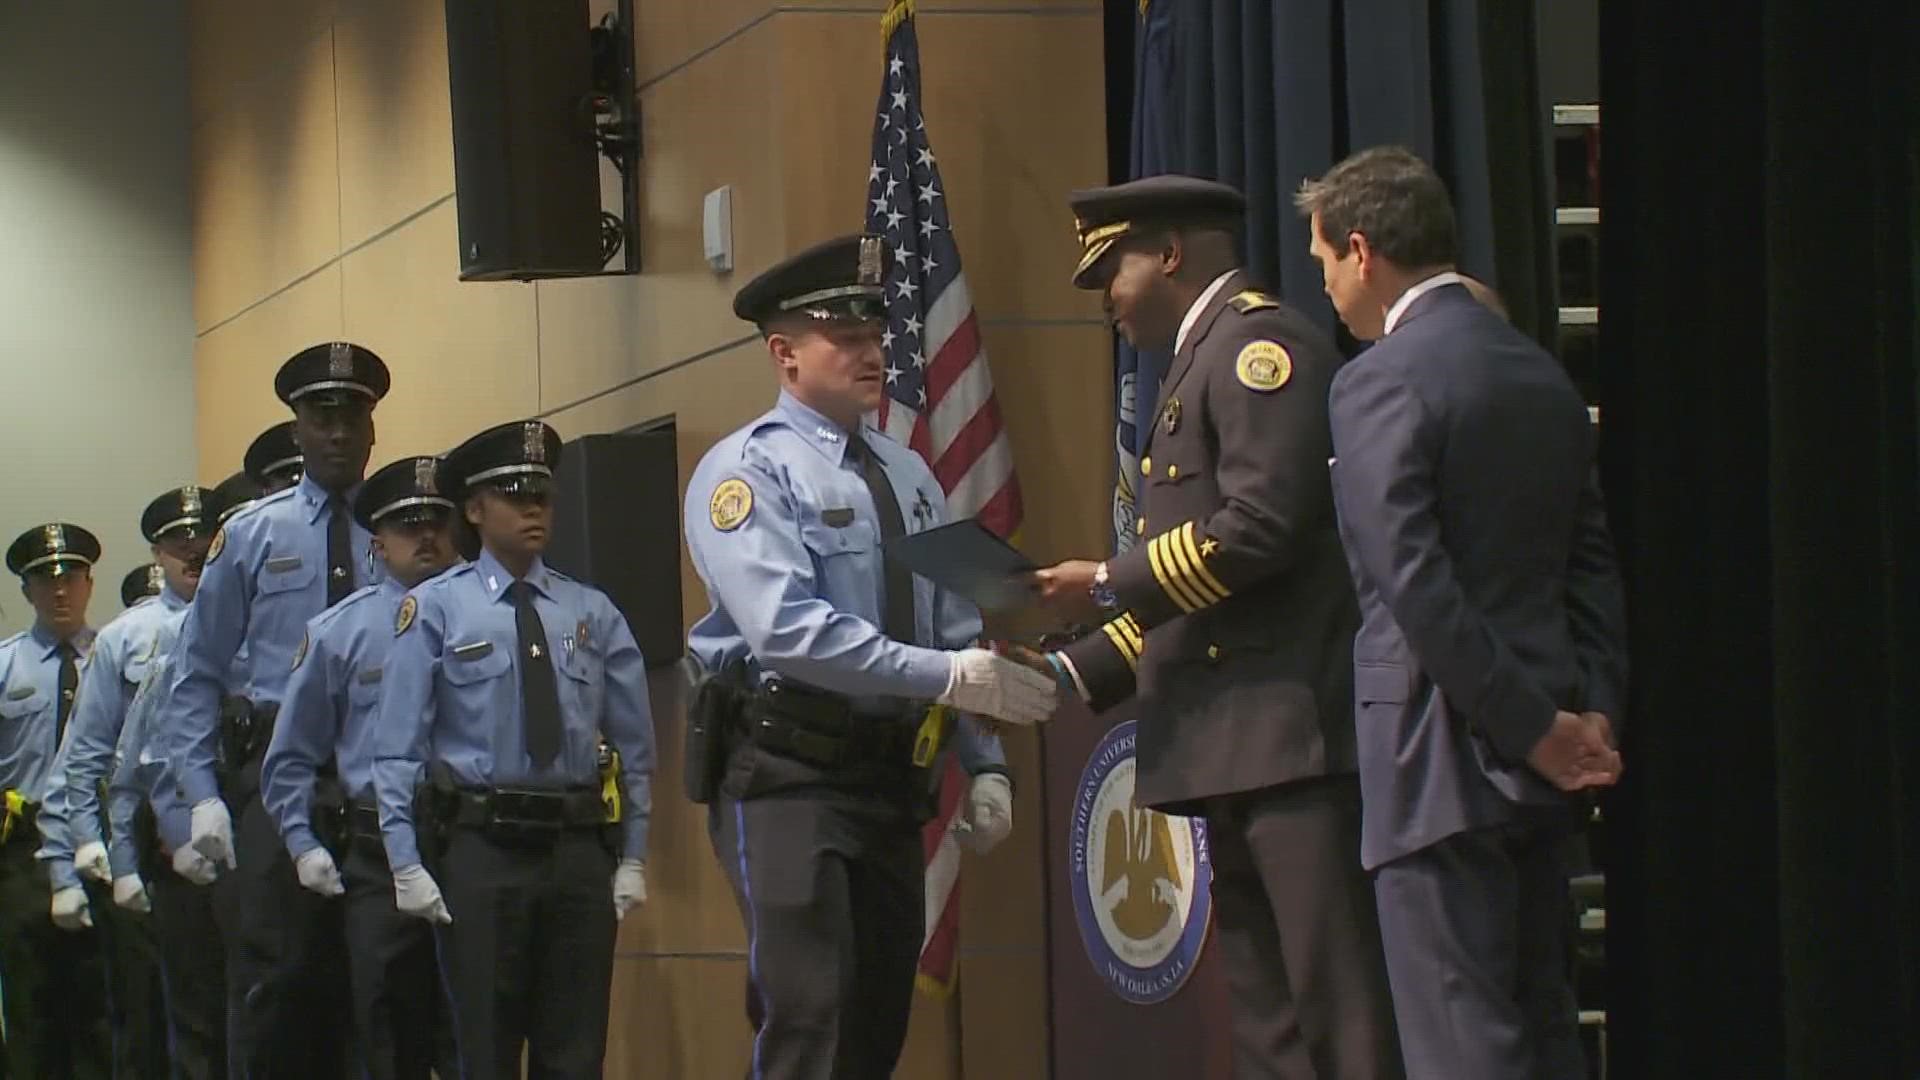 The NOPD had 168 officers leave the force in 2022 and hired only 25 recruits.